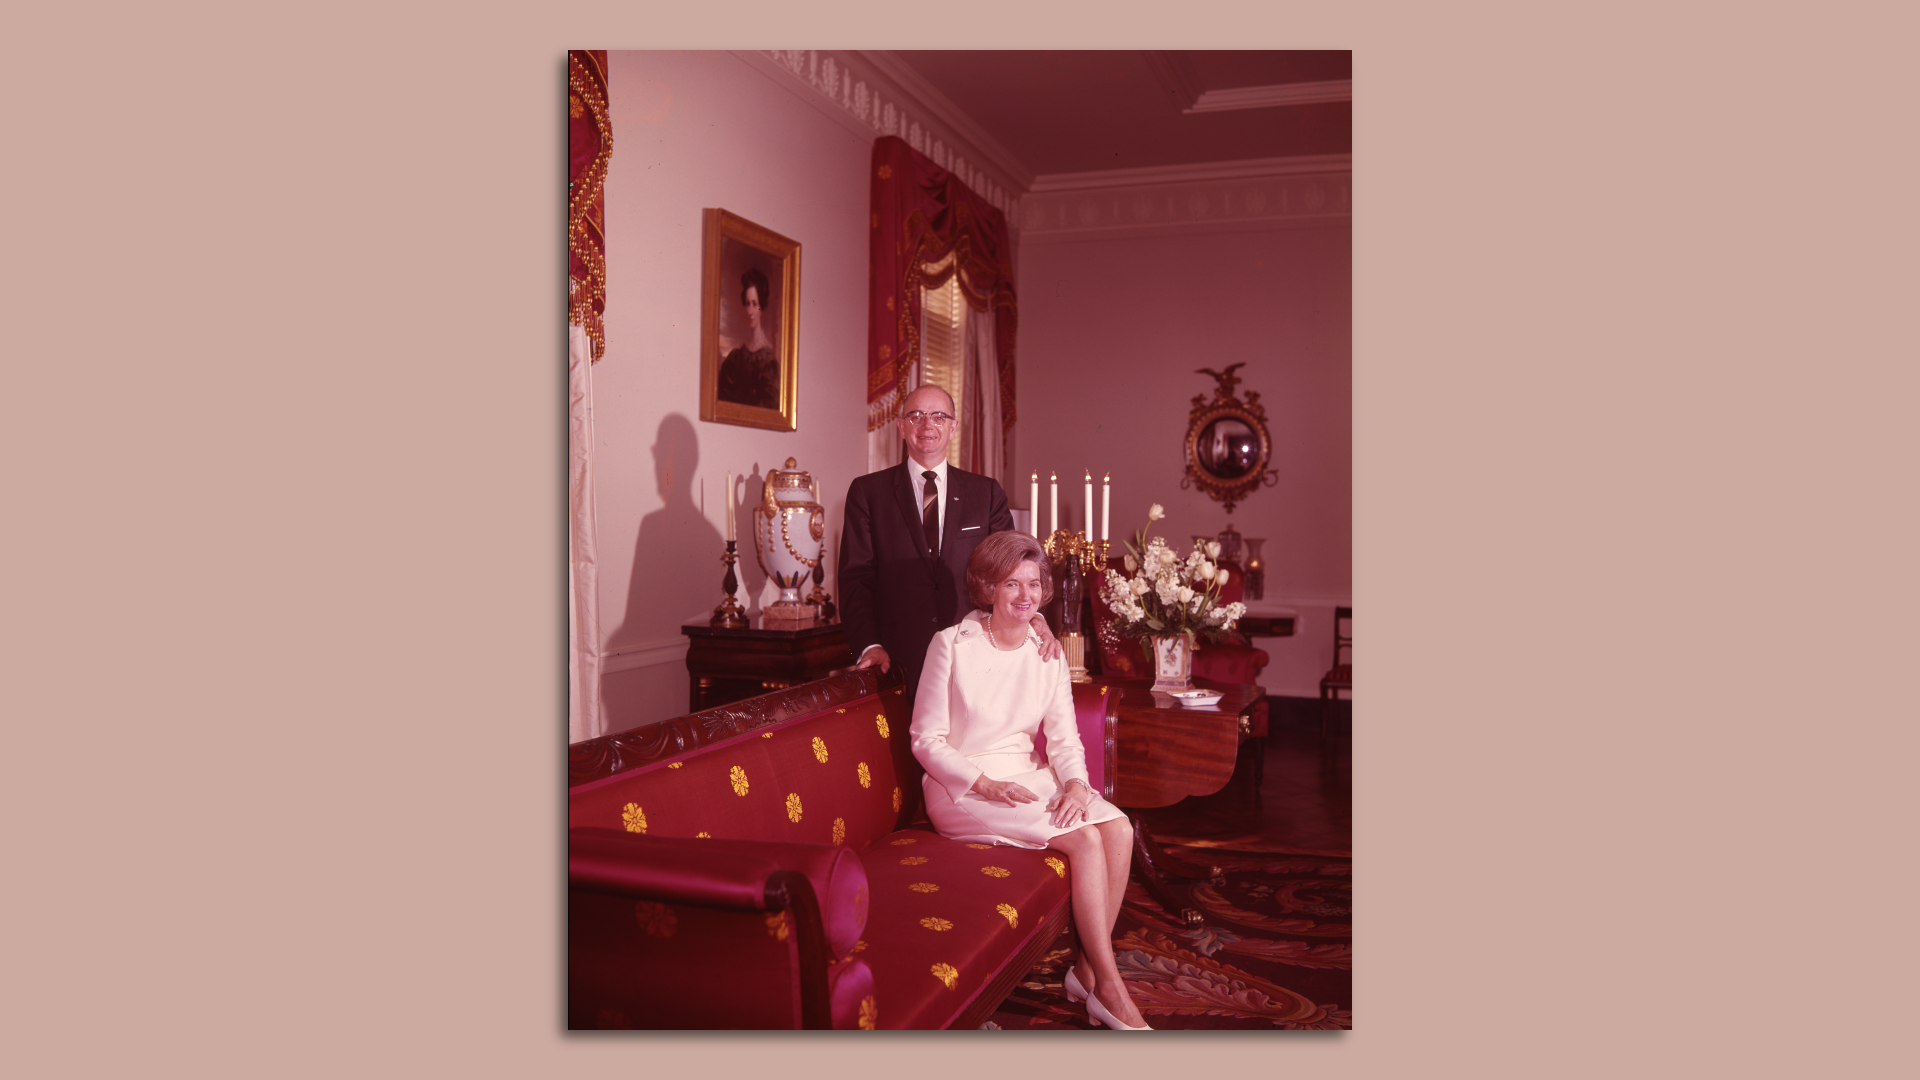 Gov. Lester Maddox and First Lady Hattie Maddox pose in the governor's mansion in 1968. Photo: Kenan Research Center at the Atlanta History Center. Floyd Jillson Photographs Collection.